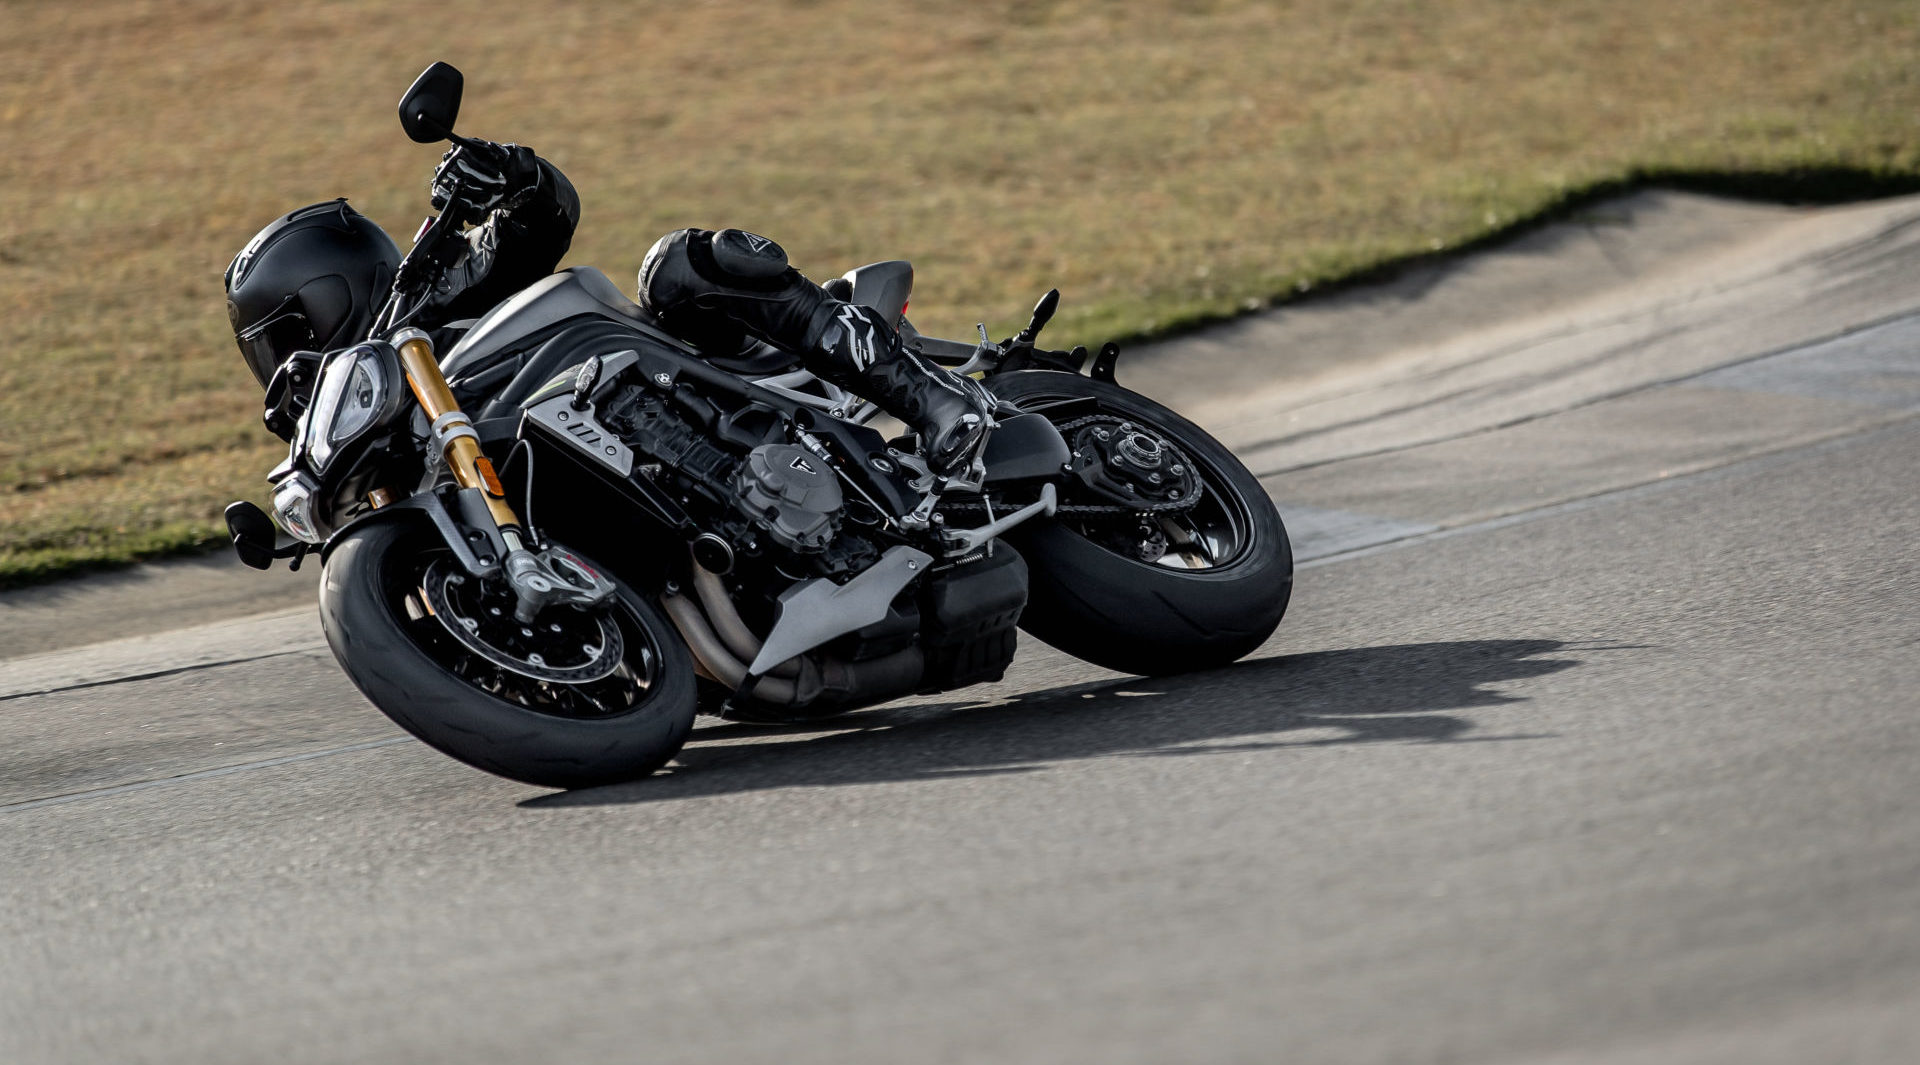 A test rider demonstrating the 2021 Triumph Speed Triple 1200 RS's new handling capabilities. Photo courtesy Triumph.